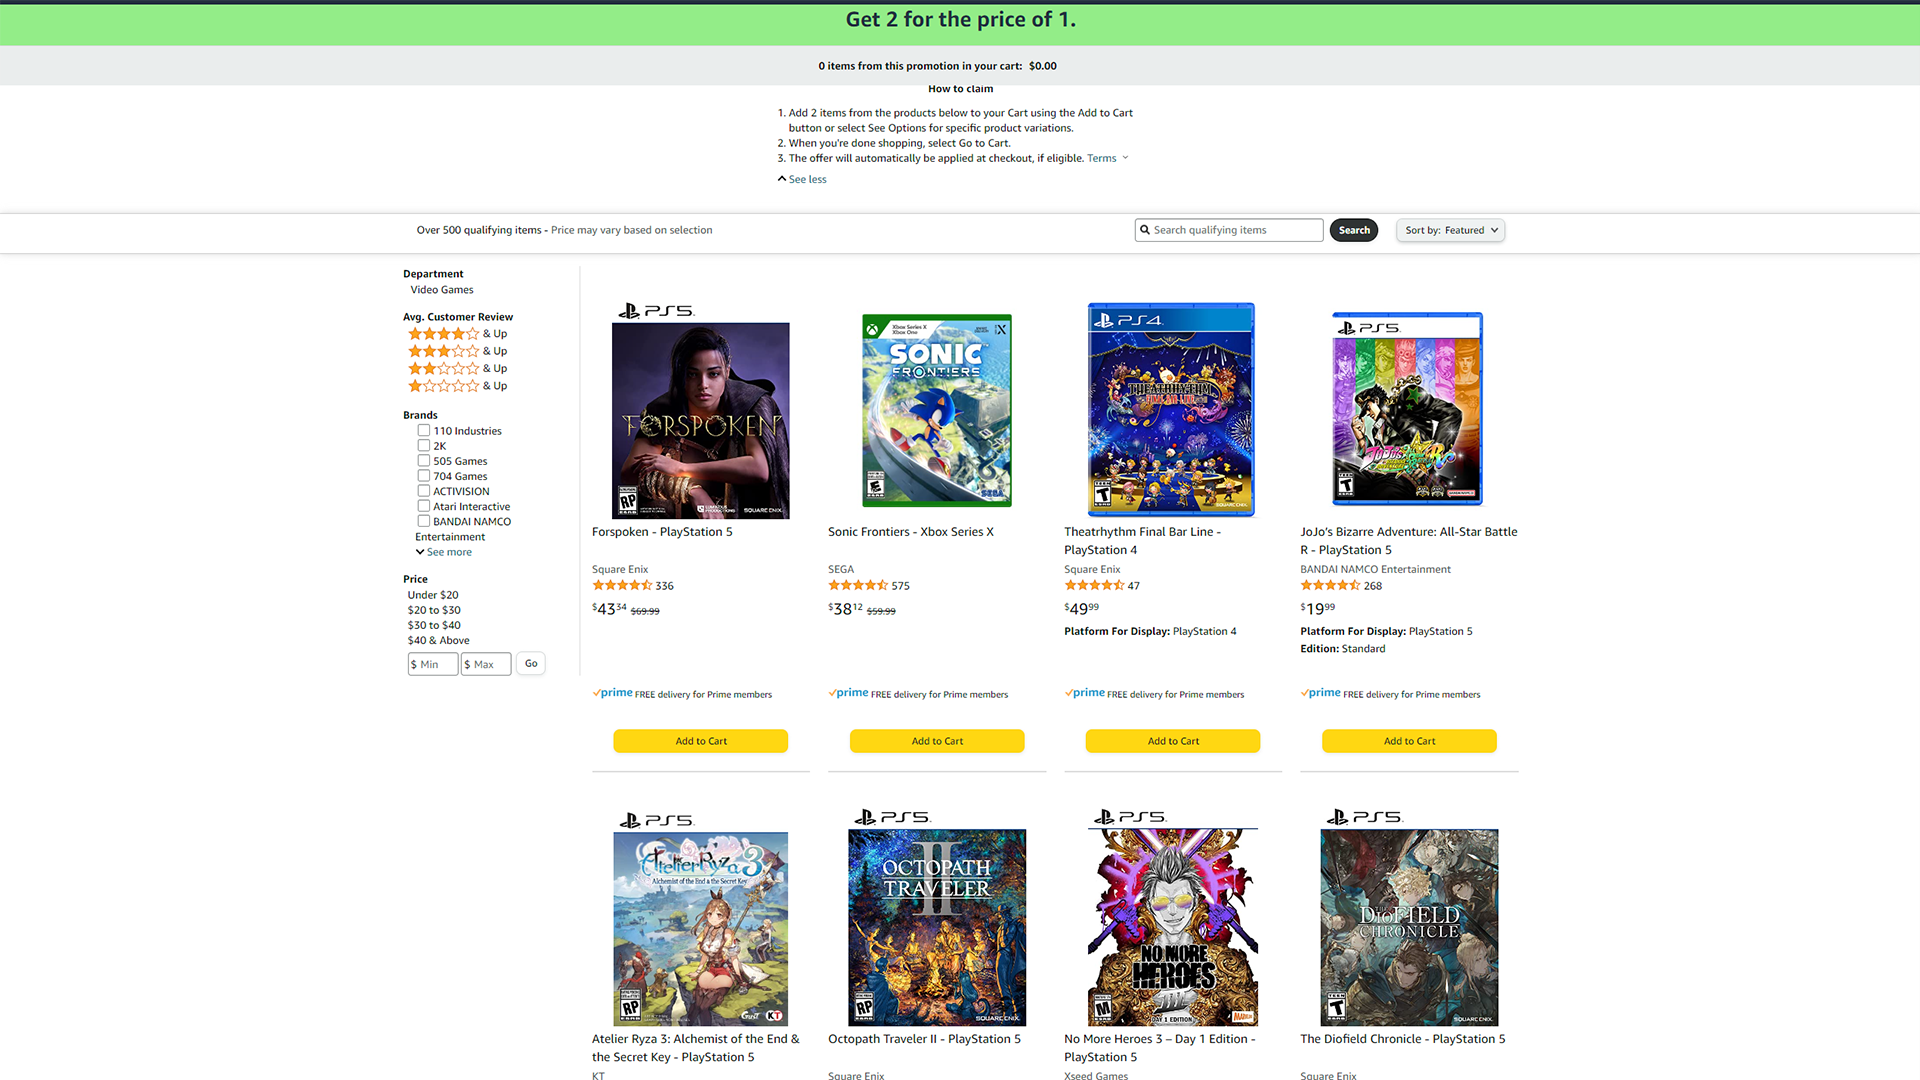 Amazon is currently offering a buy one get one free deal on certain games